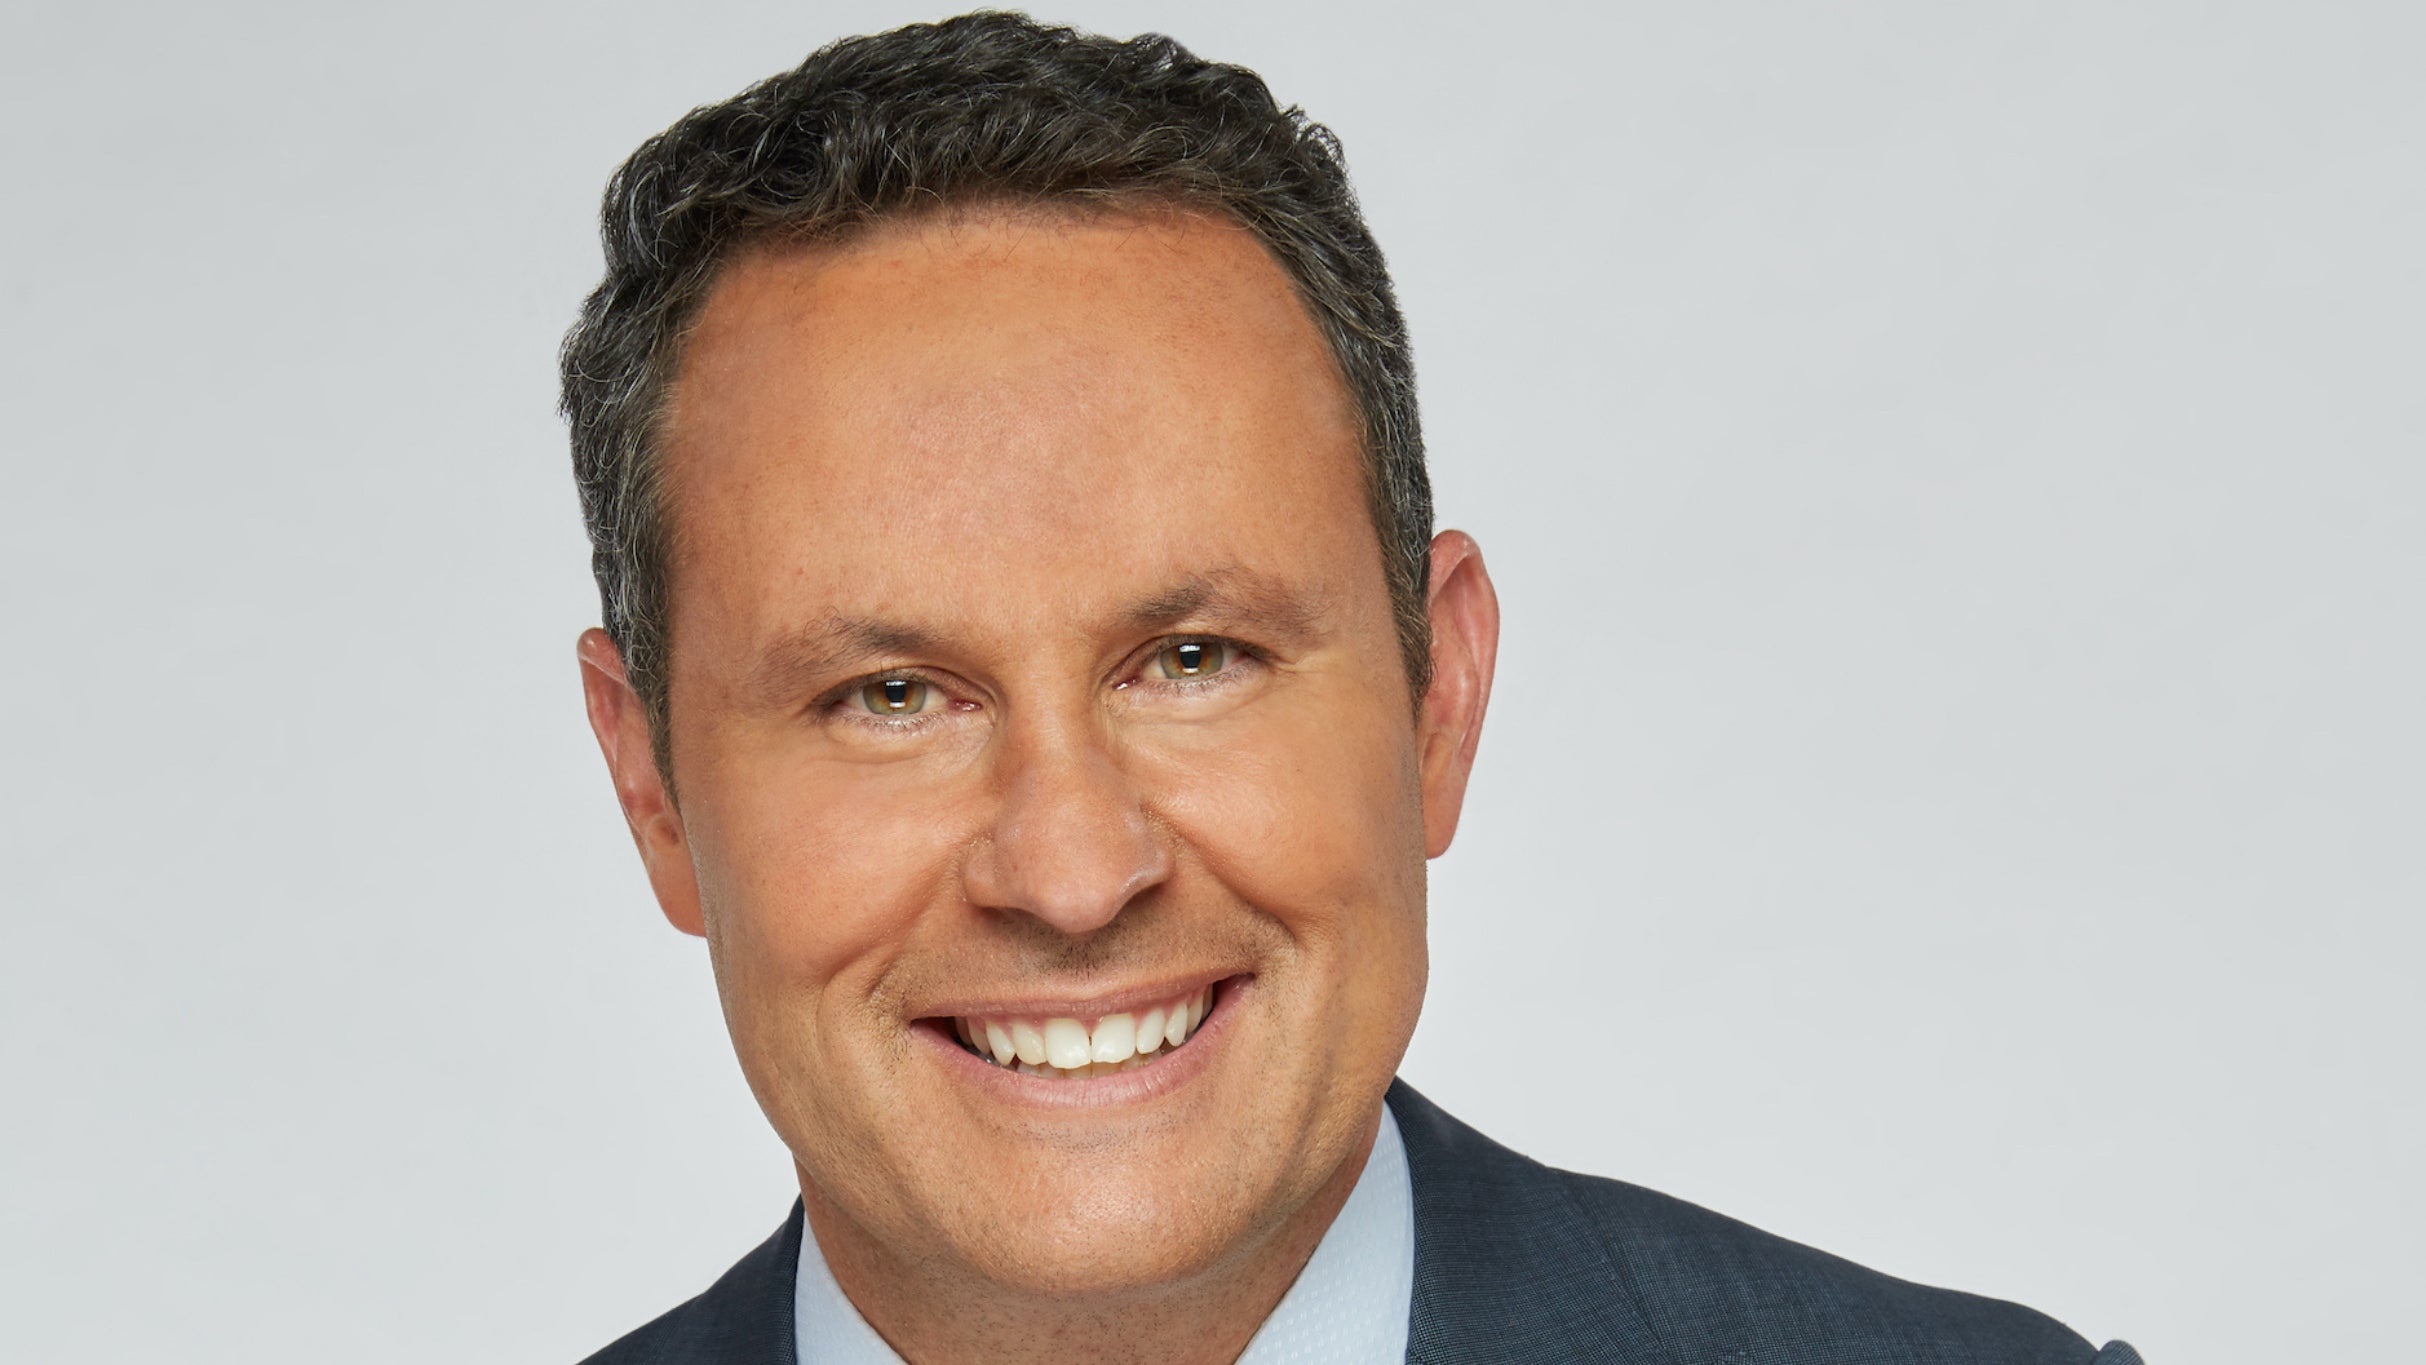 Brian Kilmeade: The History, Liberty and Laughs Tour